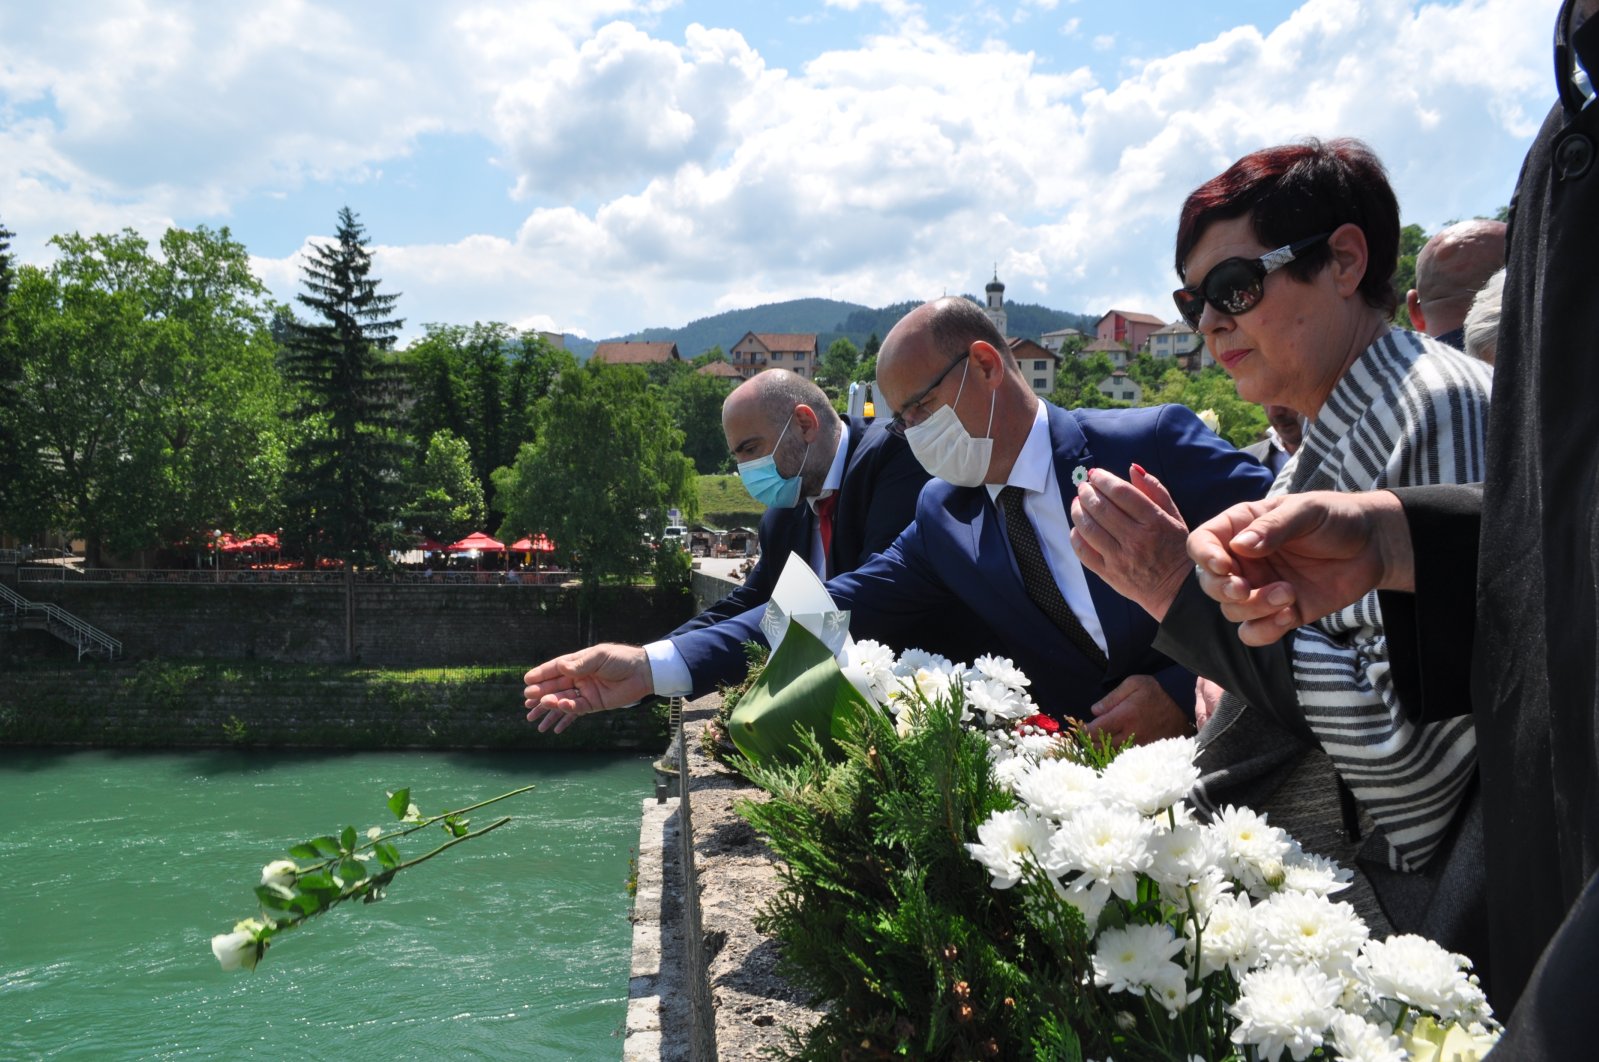 Relatives of the victims of the Visegrad massacre in the Bosnian War in 1992-1995 throw flowers into the Drina river, June 12, 2021. (AA Photo)